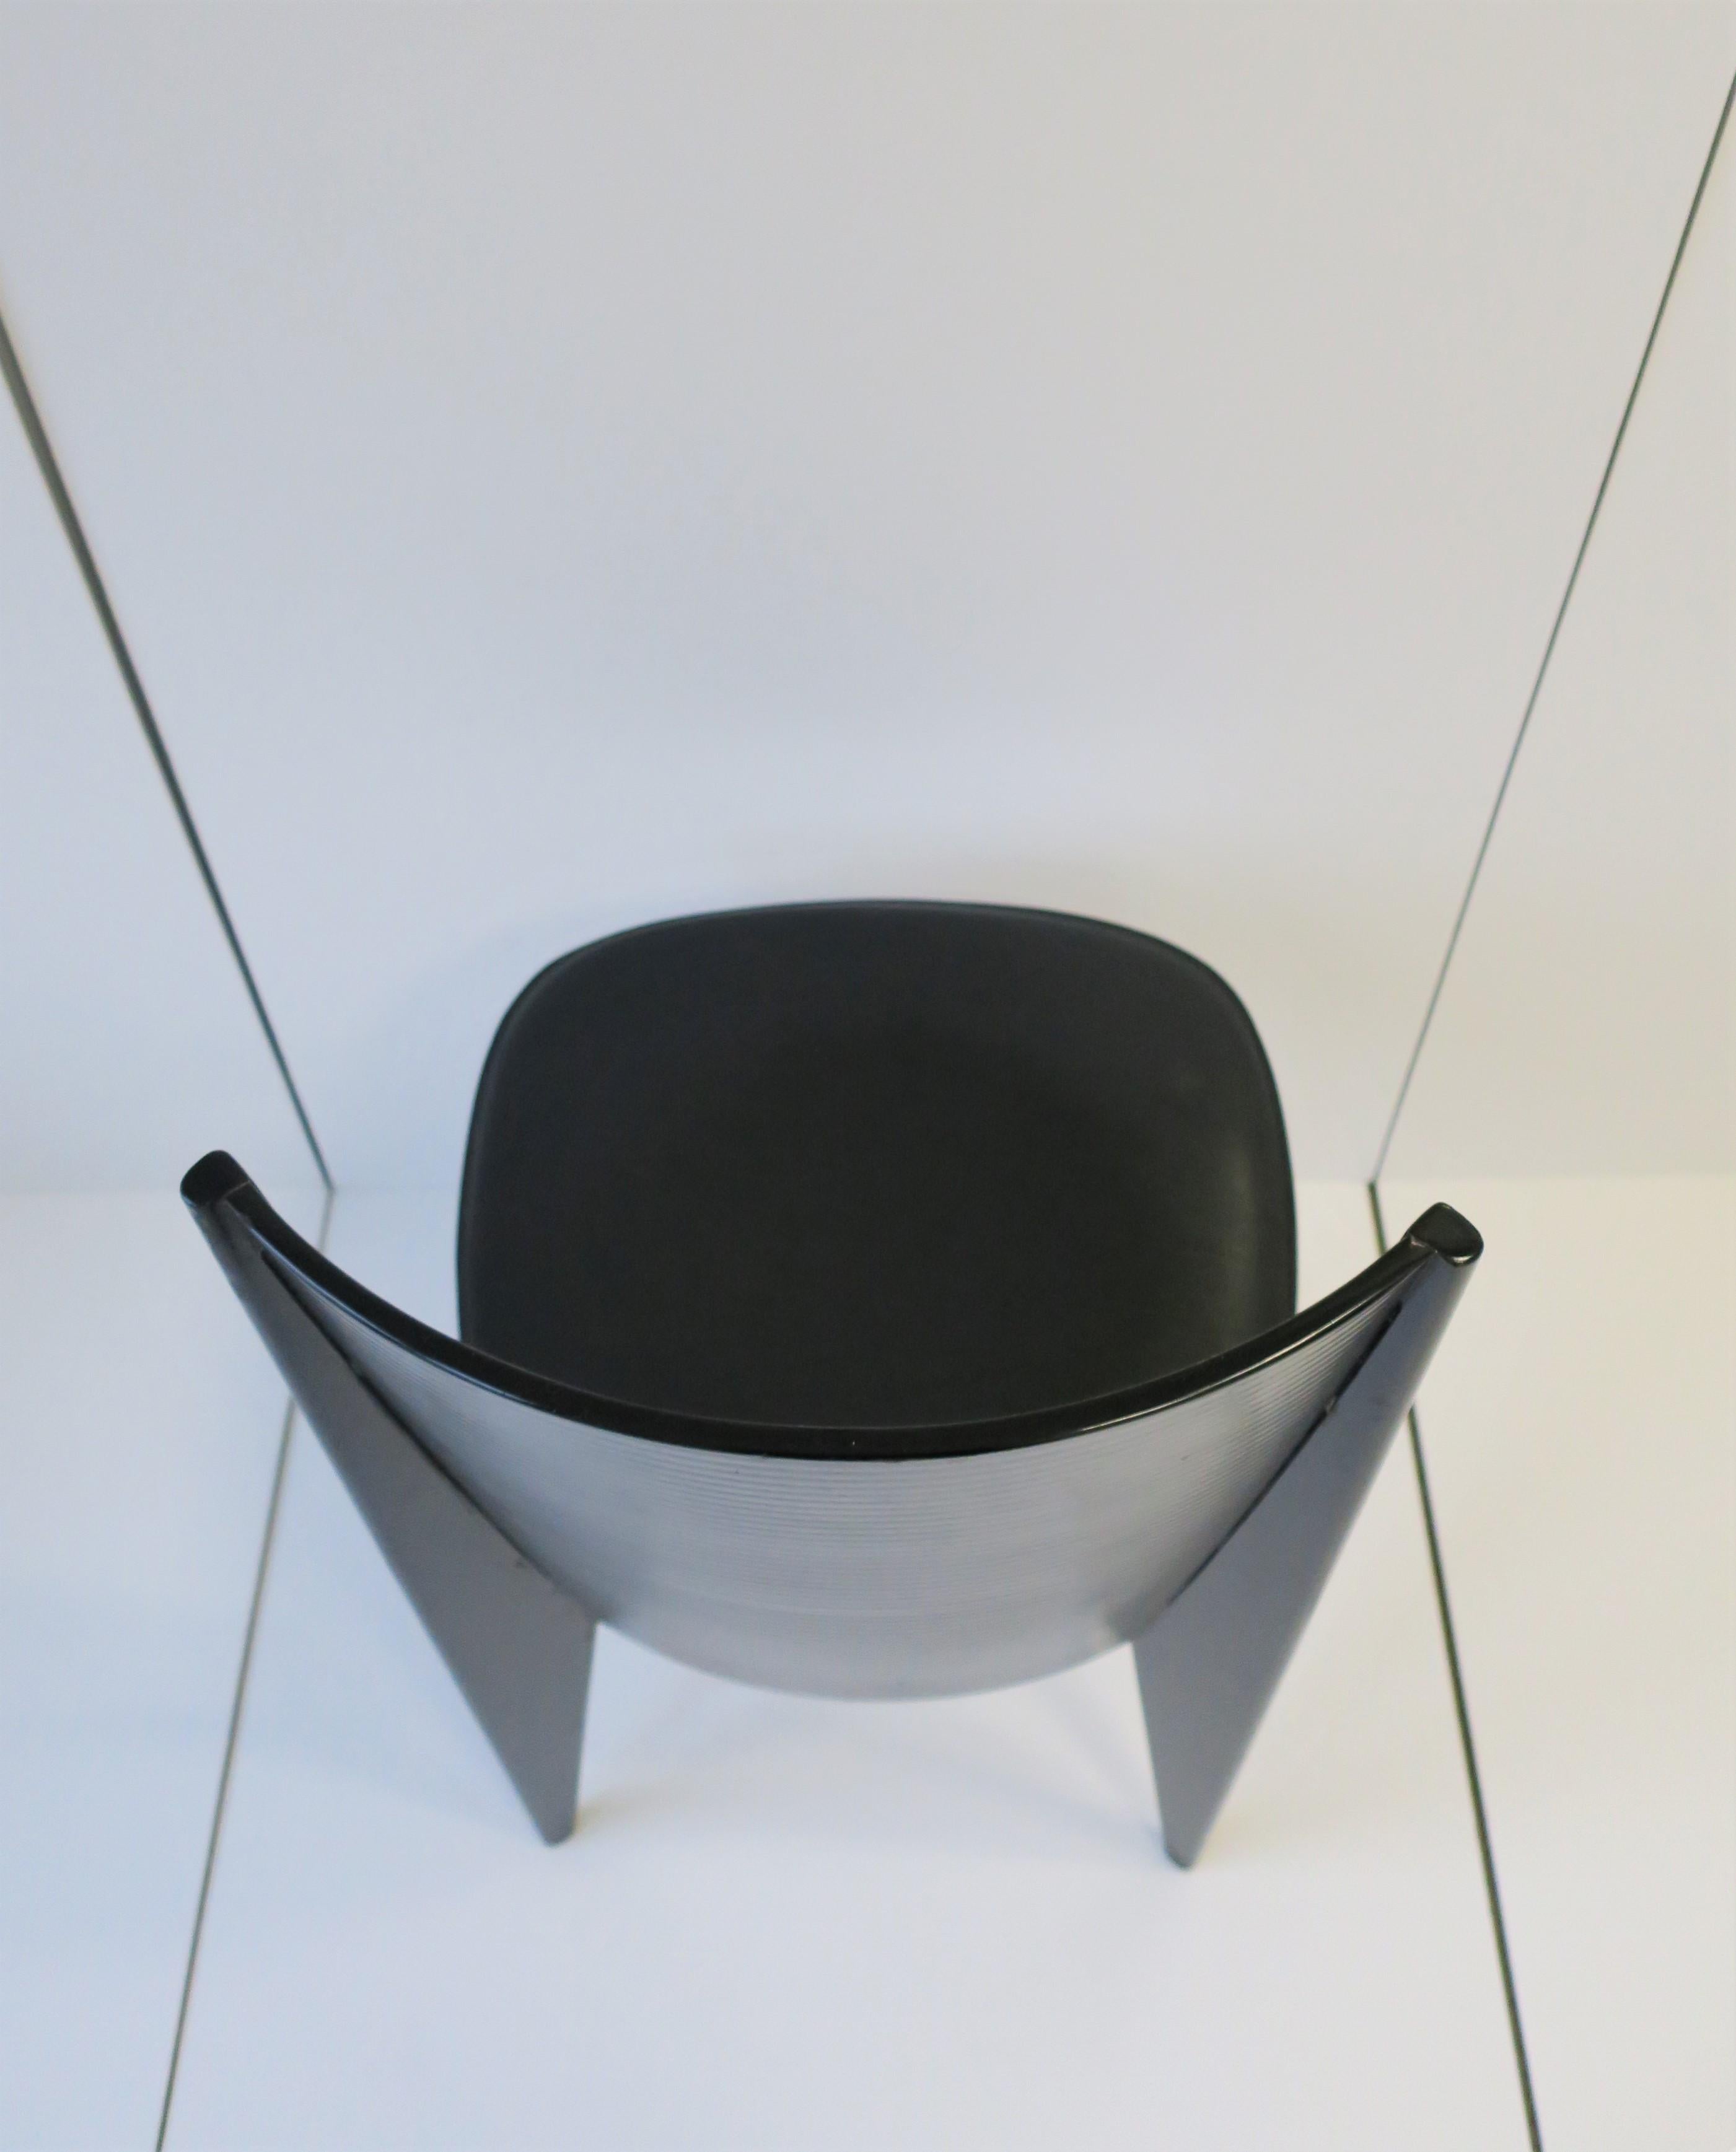 Late 20th Century Italian Designer Postmodern Black Lacquer Wood and Leather Side Chair For Sale